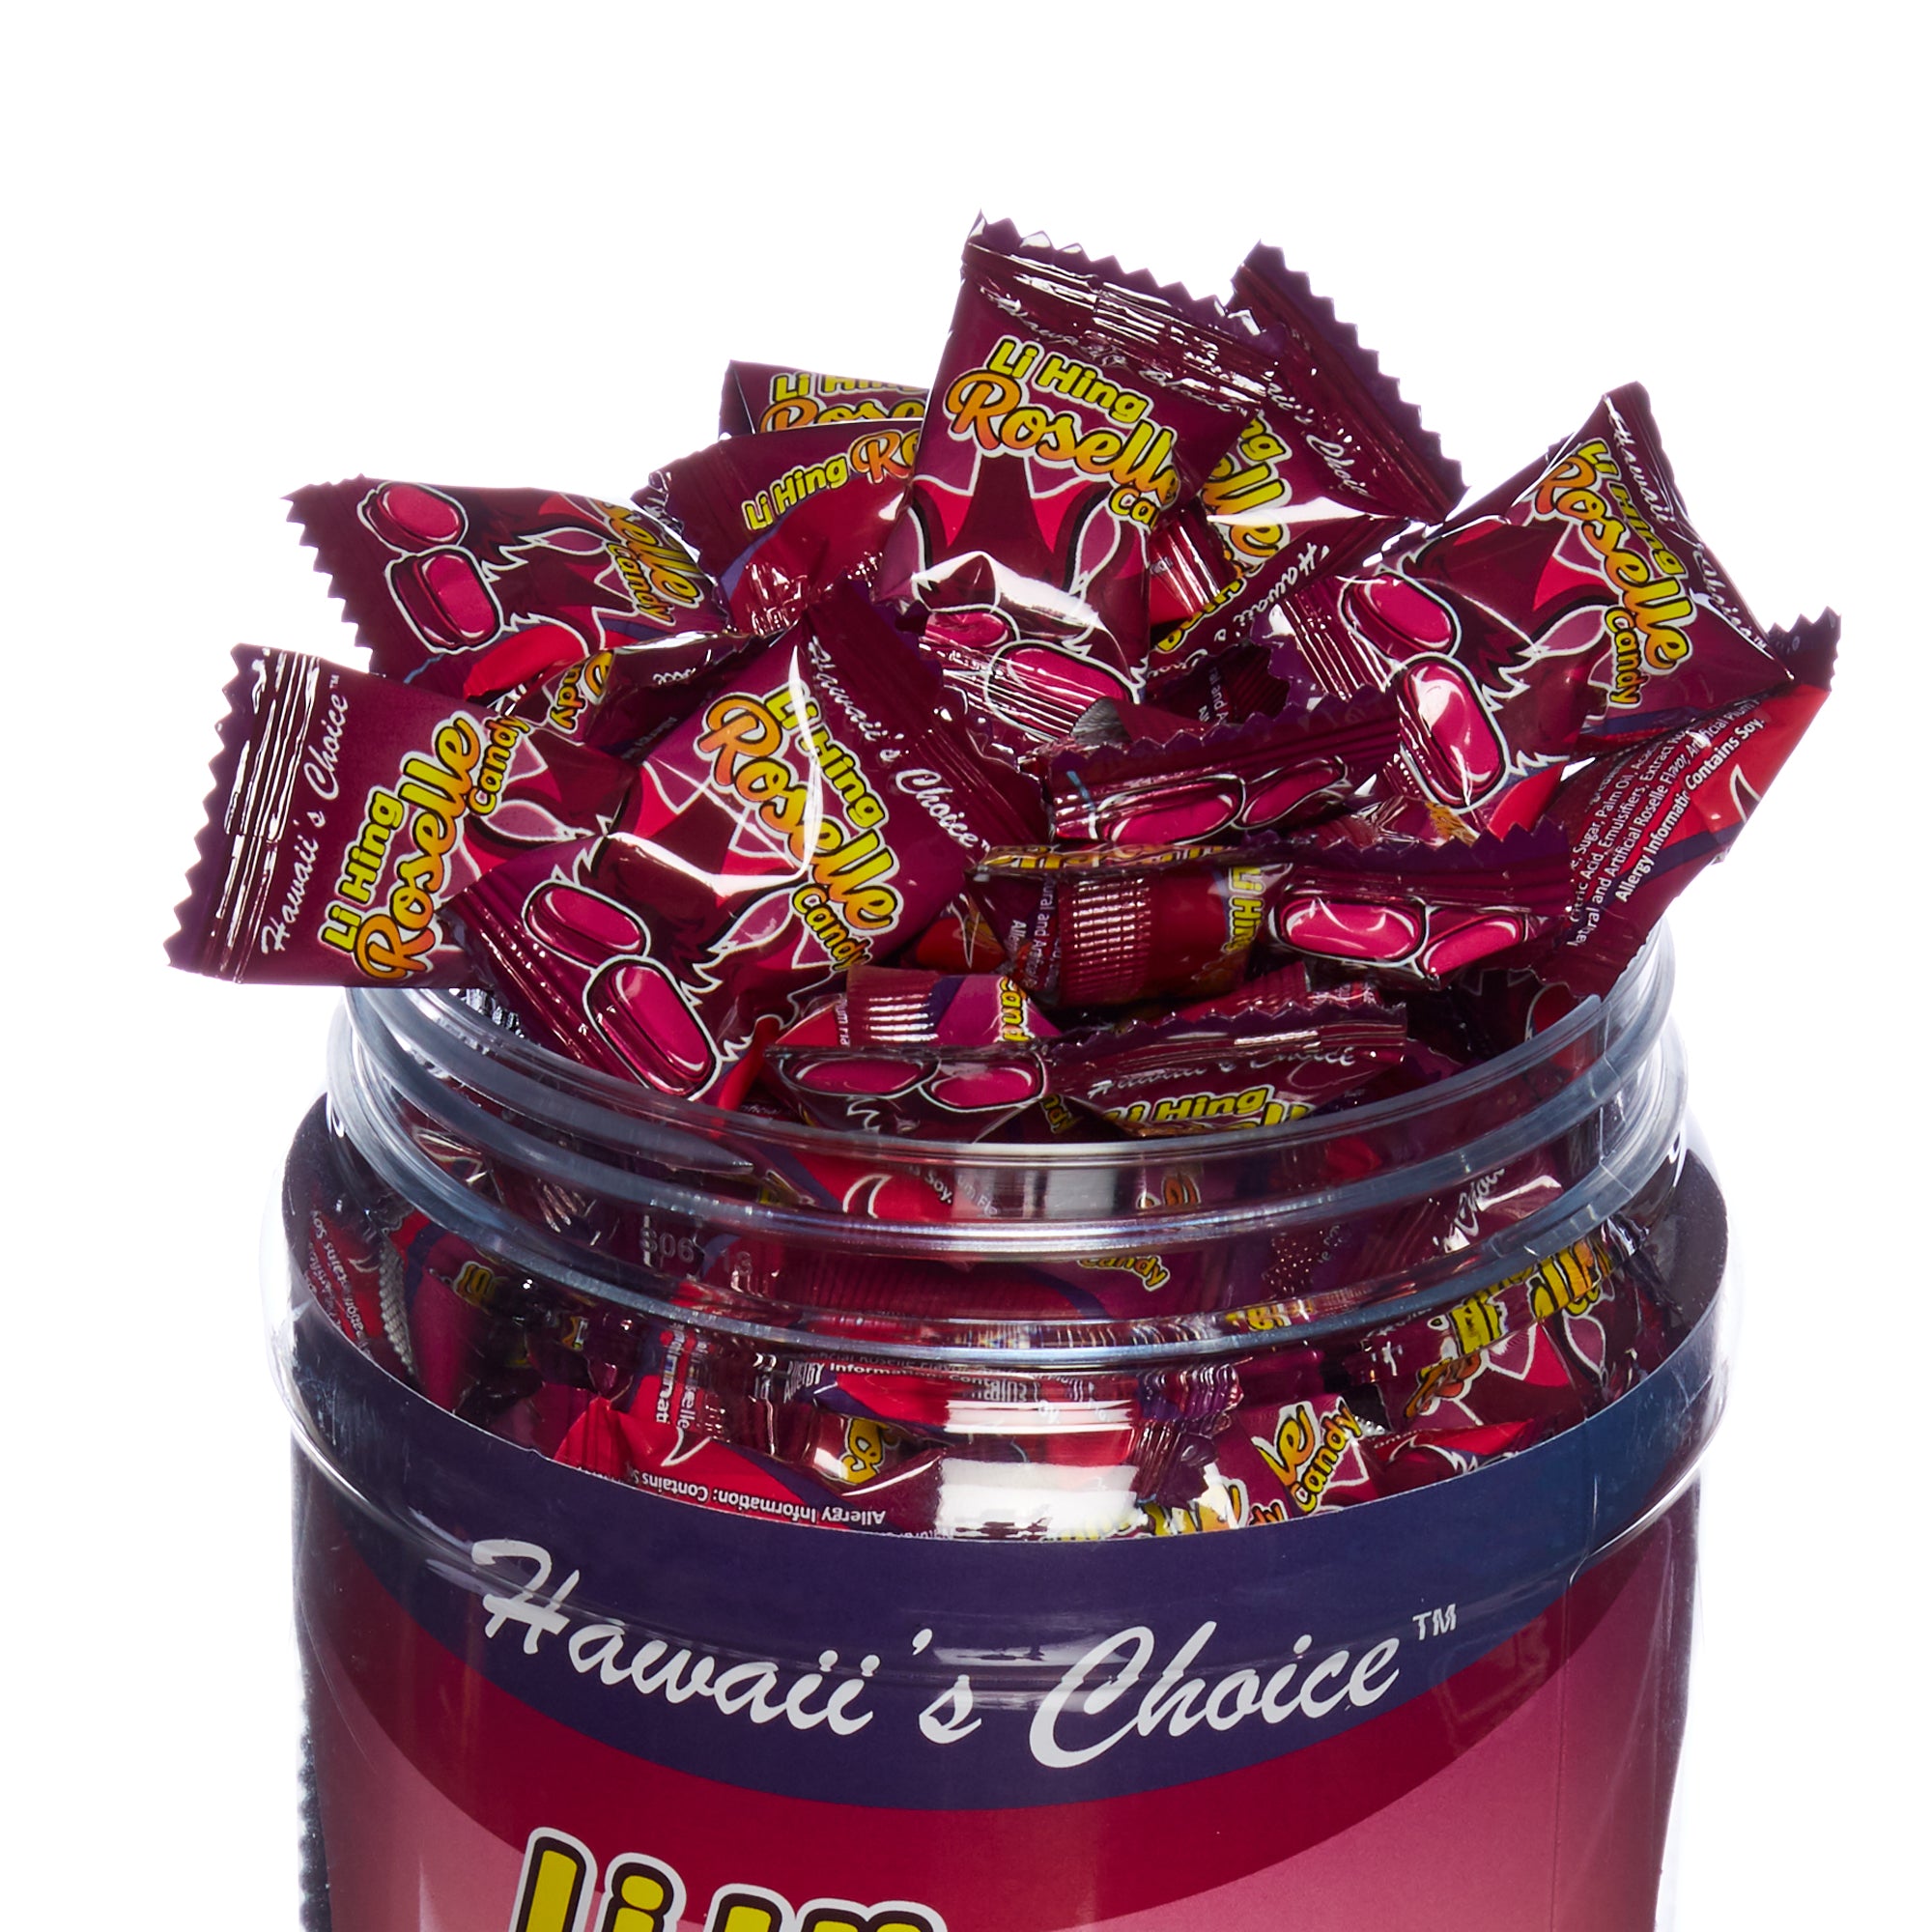 Hawaii's Choice Li Hing Hawaiian Chewy Candy - Dual 1lb Roselle Jars, Individually Wrapped Mouth-Watering Candies - Reg. $19.48/jar, 10% Special@ $17.52/jar (USD)